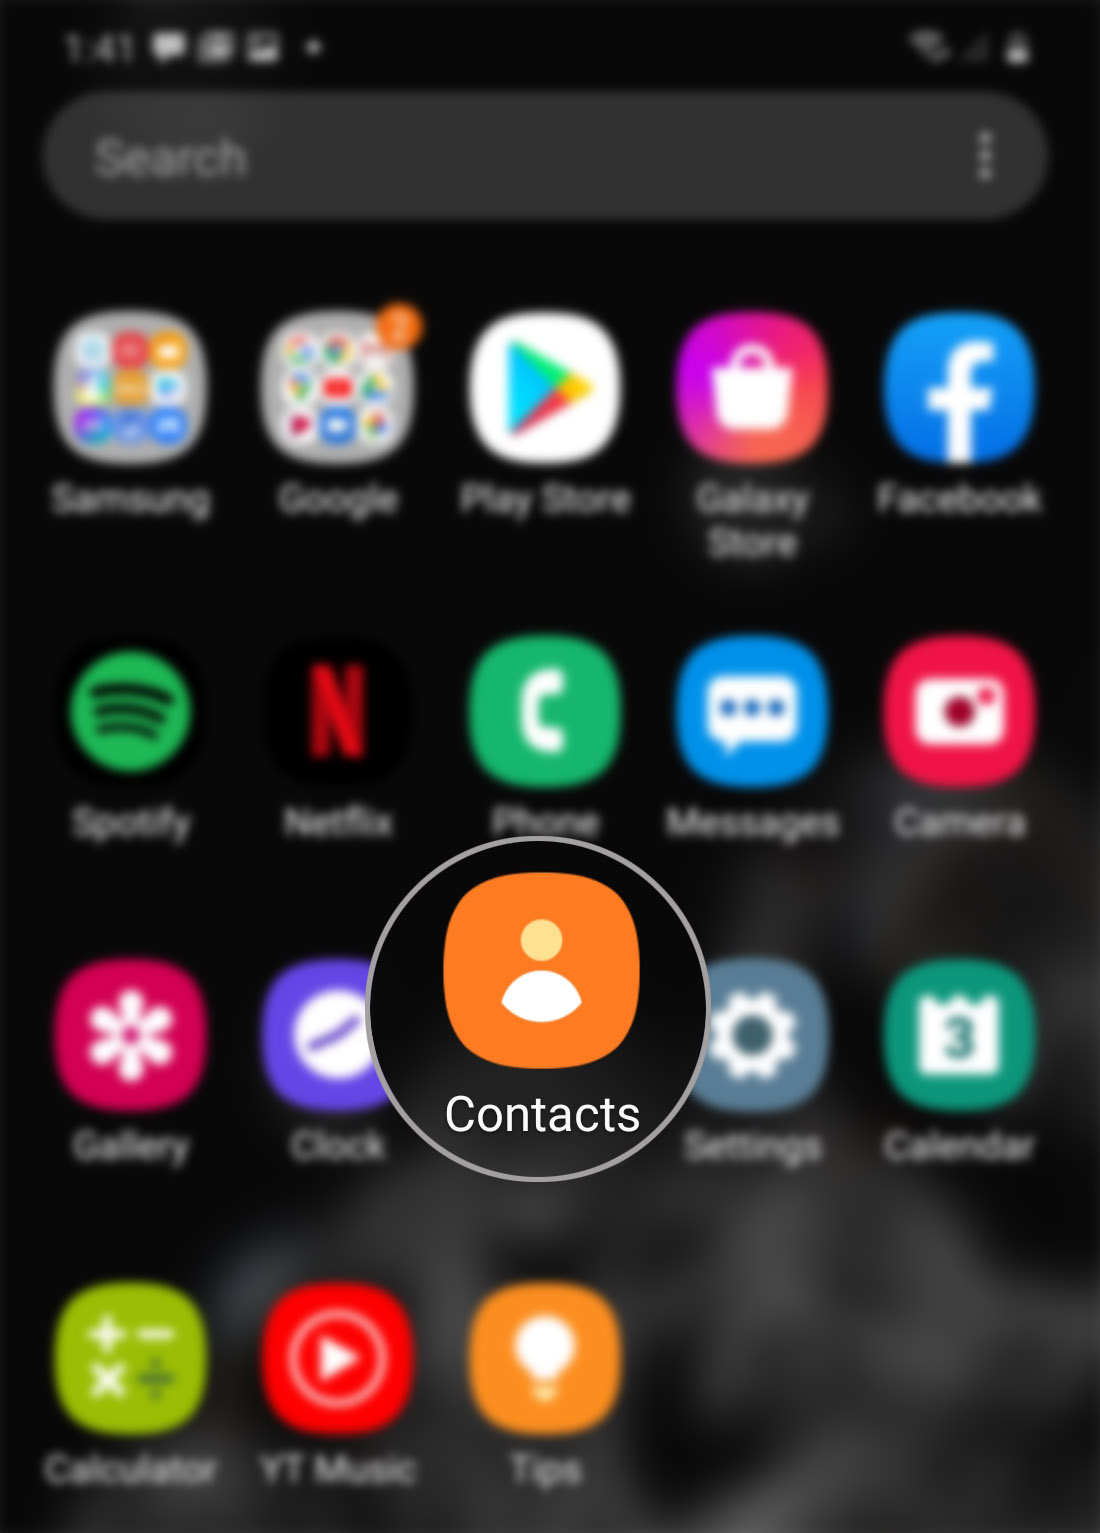 sync account contacts on galaxy s20 - open contacts app